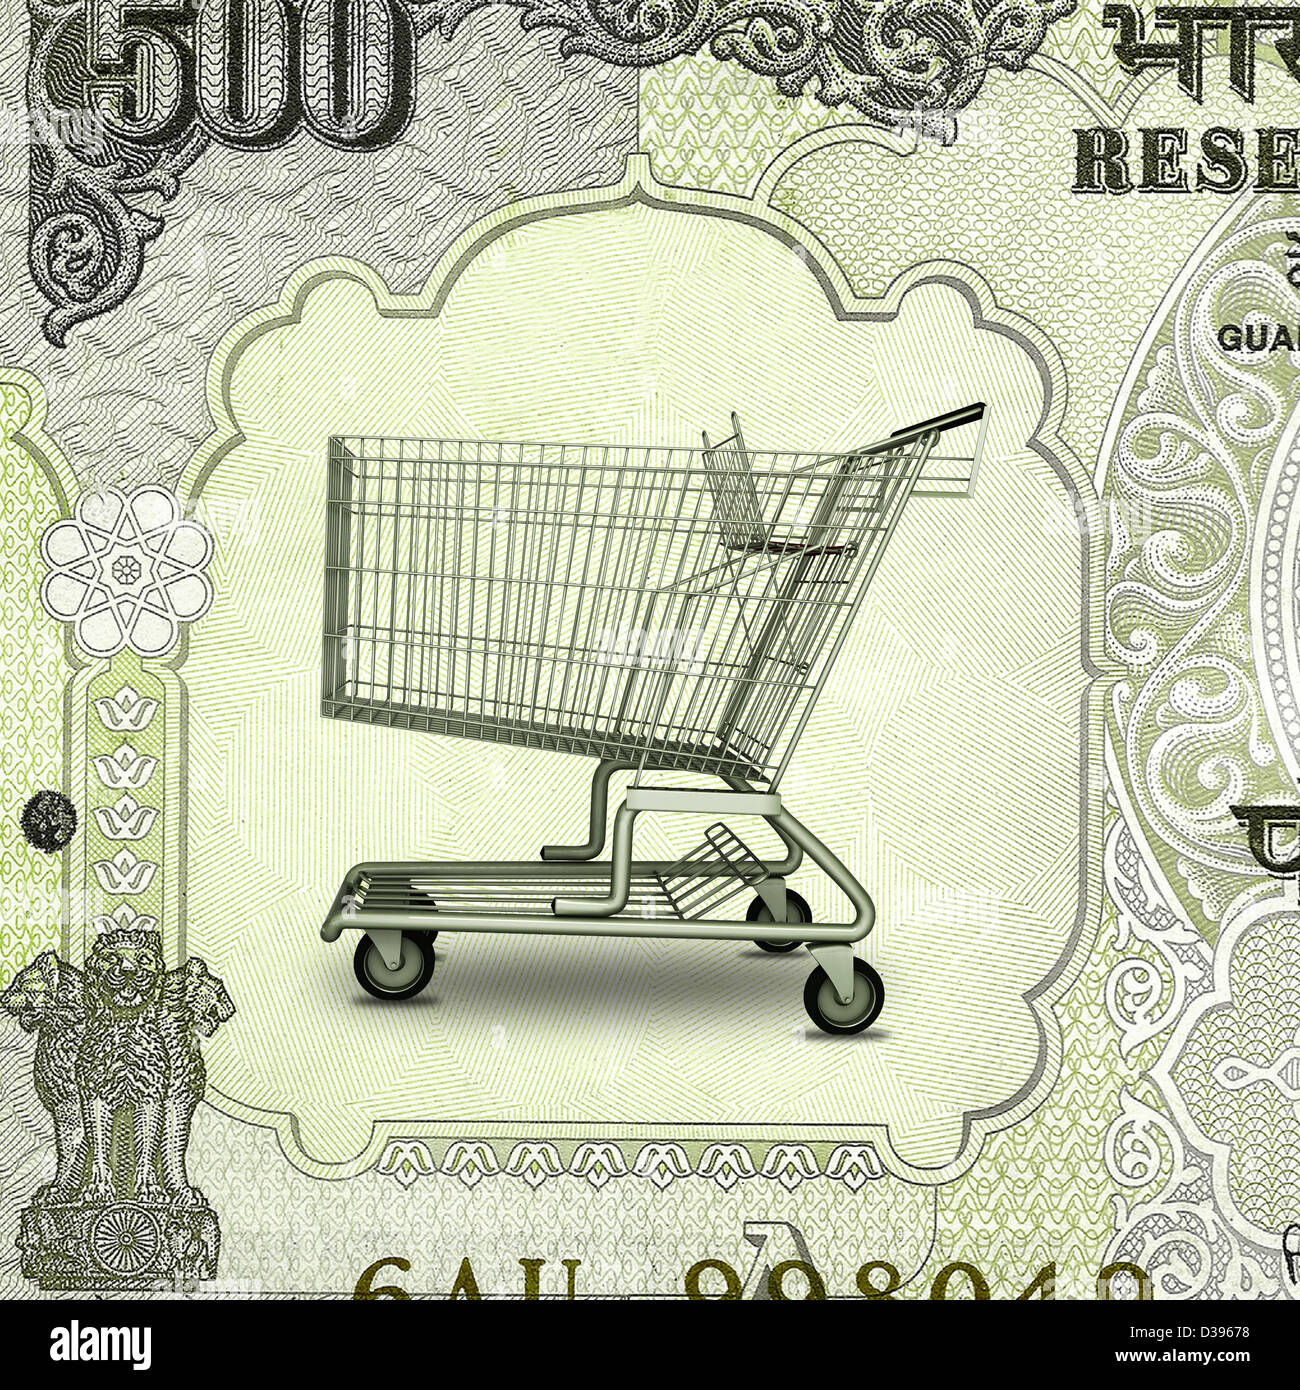 Shopping cart on Indian currency note Stock Photo